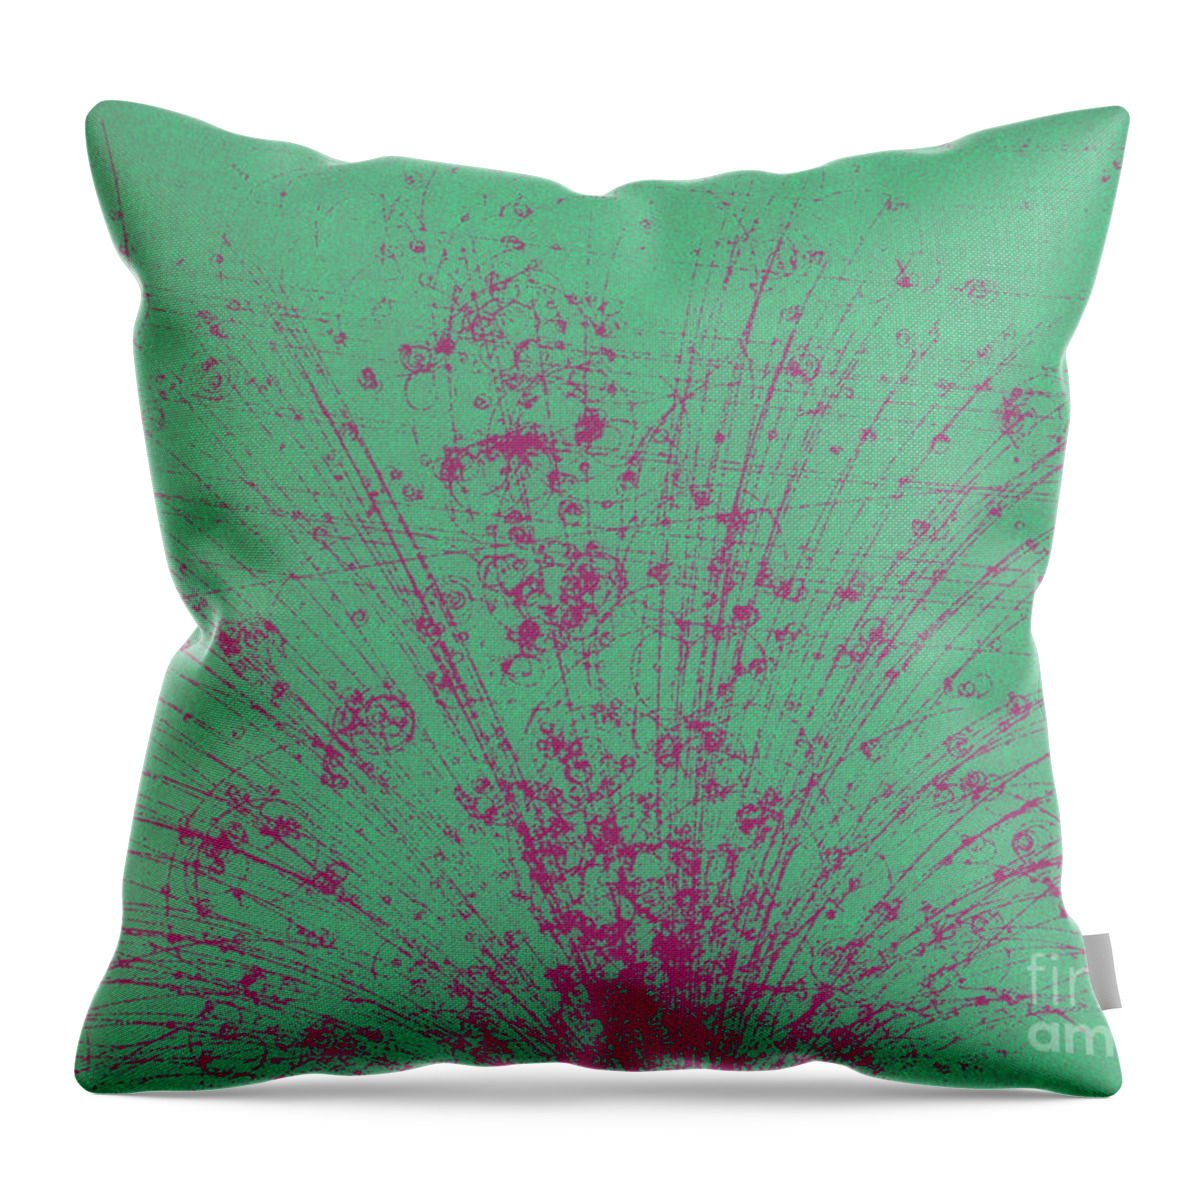 Bubble Chamber Throw Pillow featuring the photograph Cosmic Ray Particle Tracks #1 by Science Source